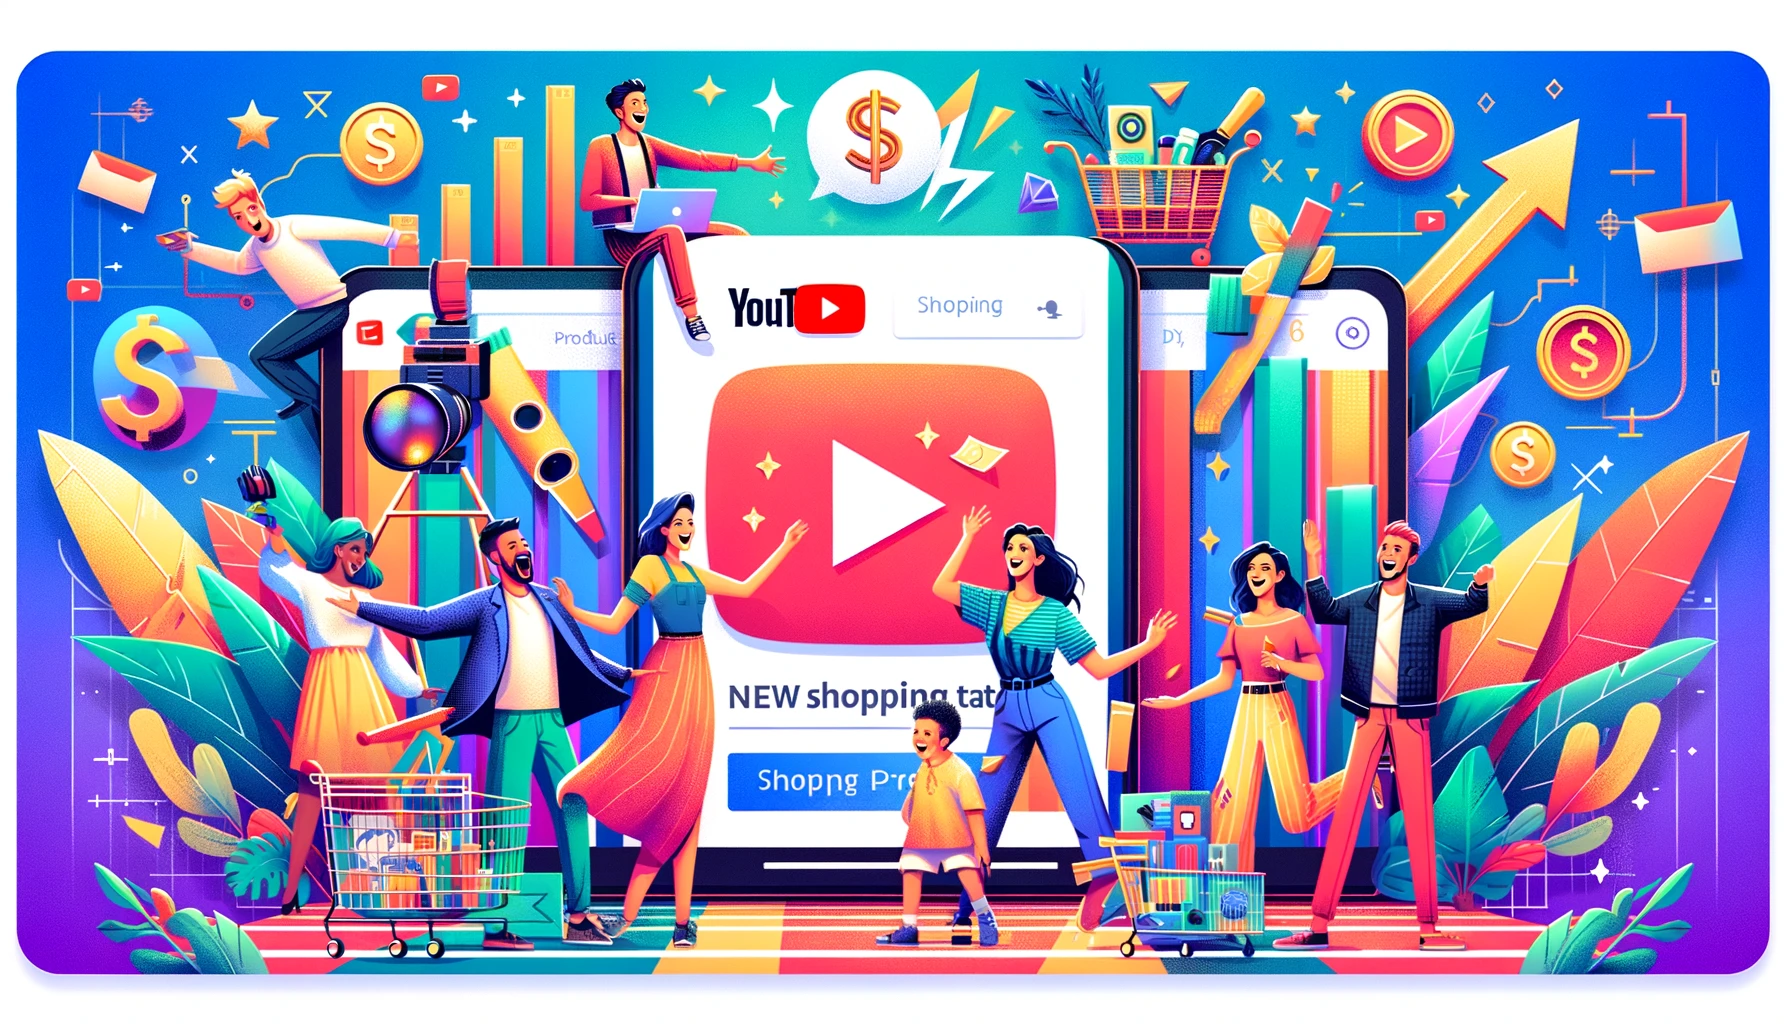 A New Money-Making Tool for Creators: YouTube Launches New Shopping Features